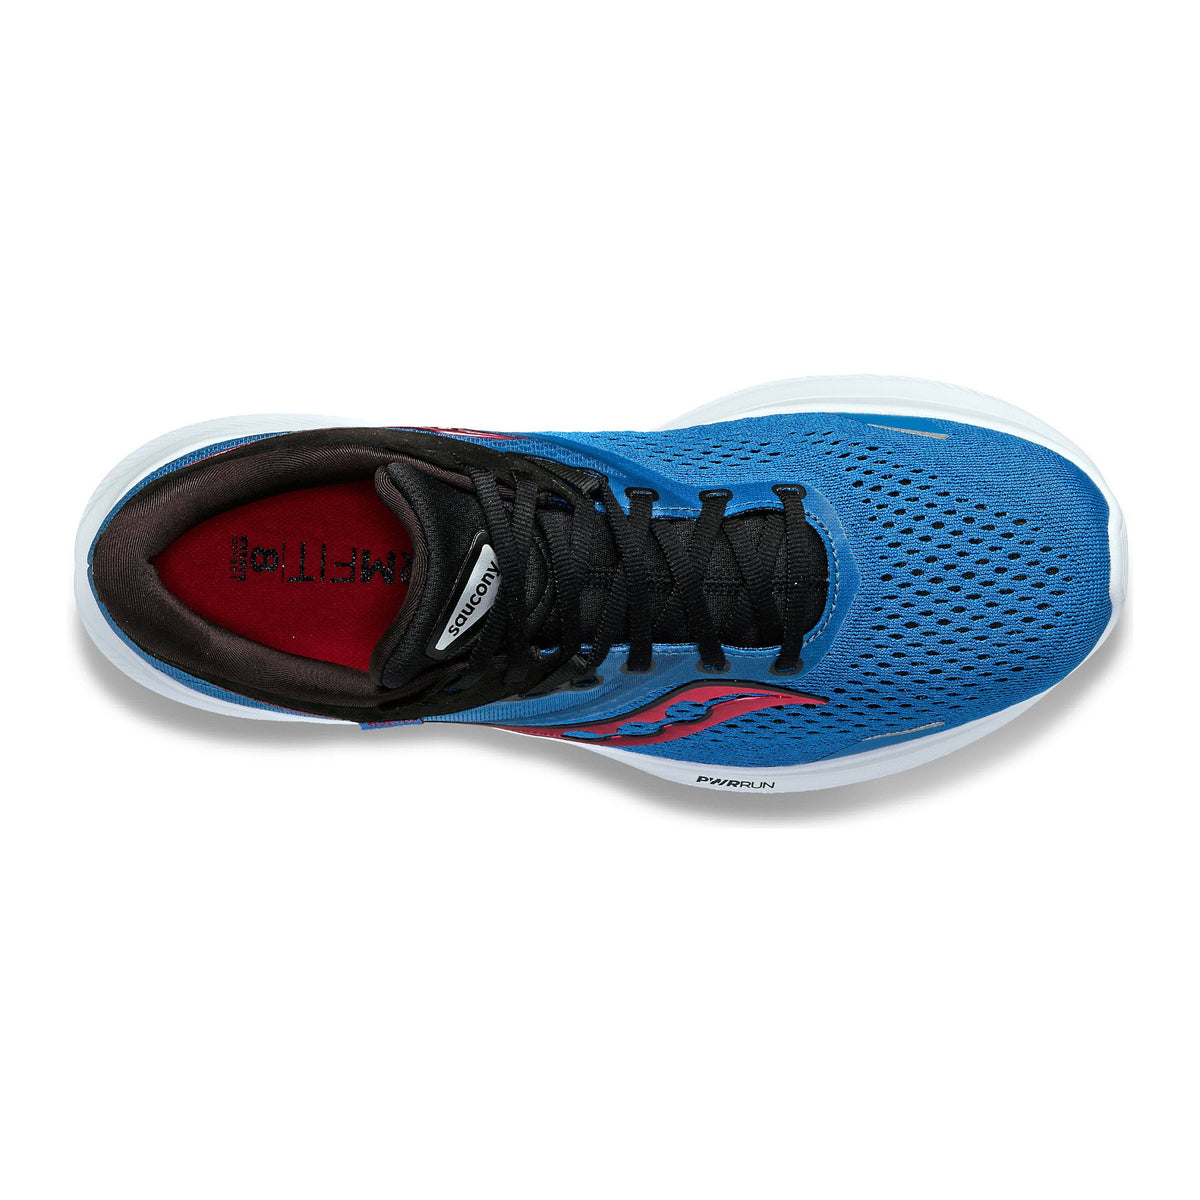 Top view of a blue Saucony Ride 16 Hydro/Black running shoe with black laces and a red interior, showing the brand logo on the insole.